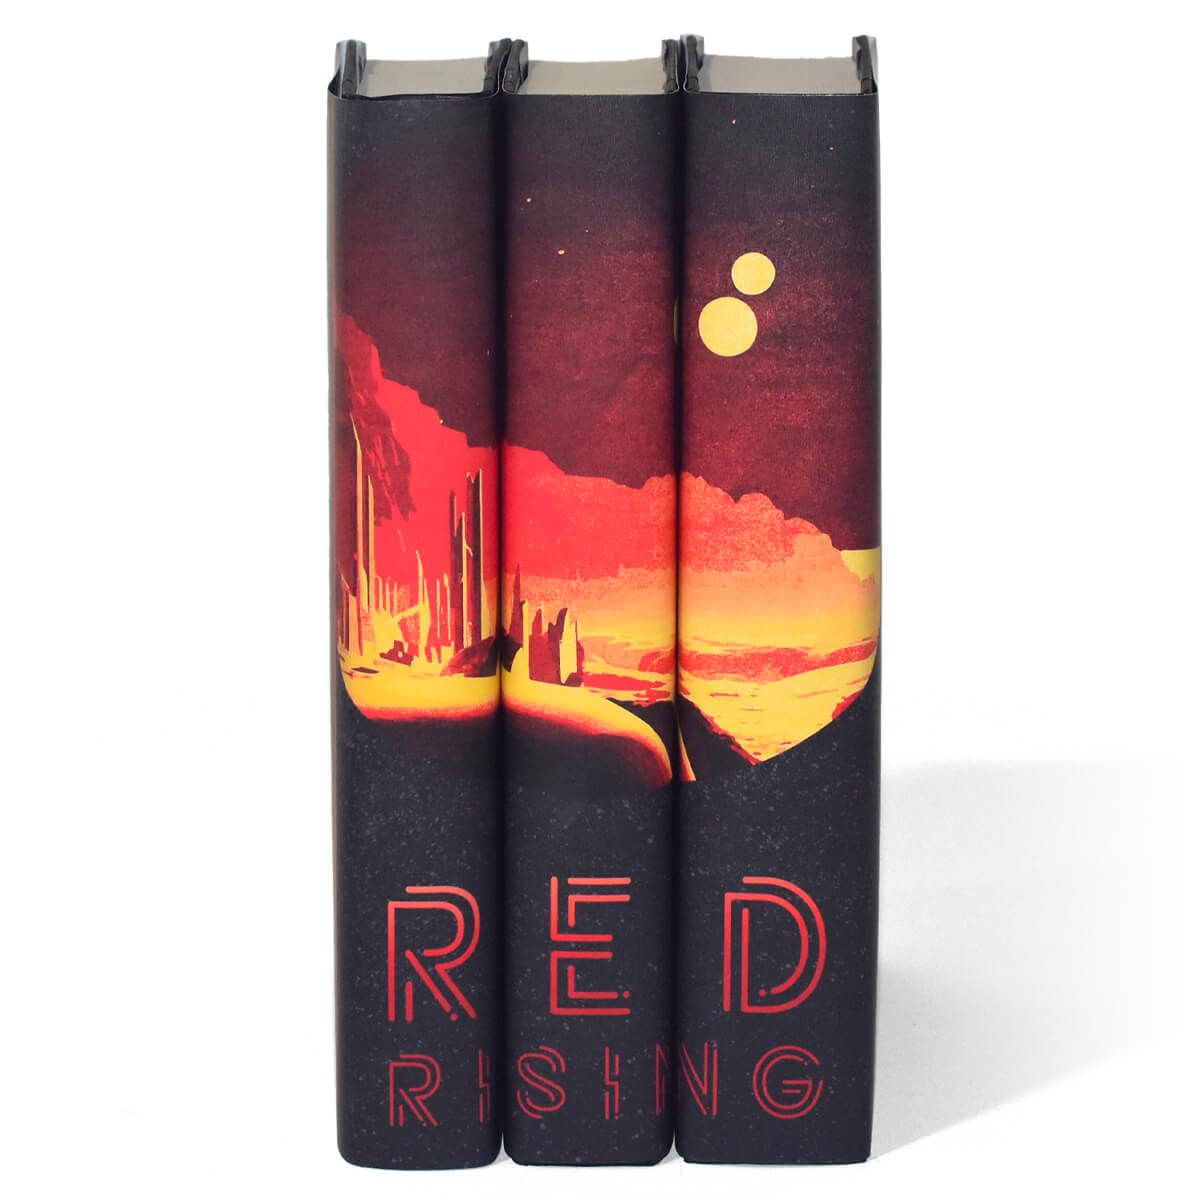 Customized Red Rising Book Set